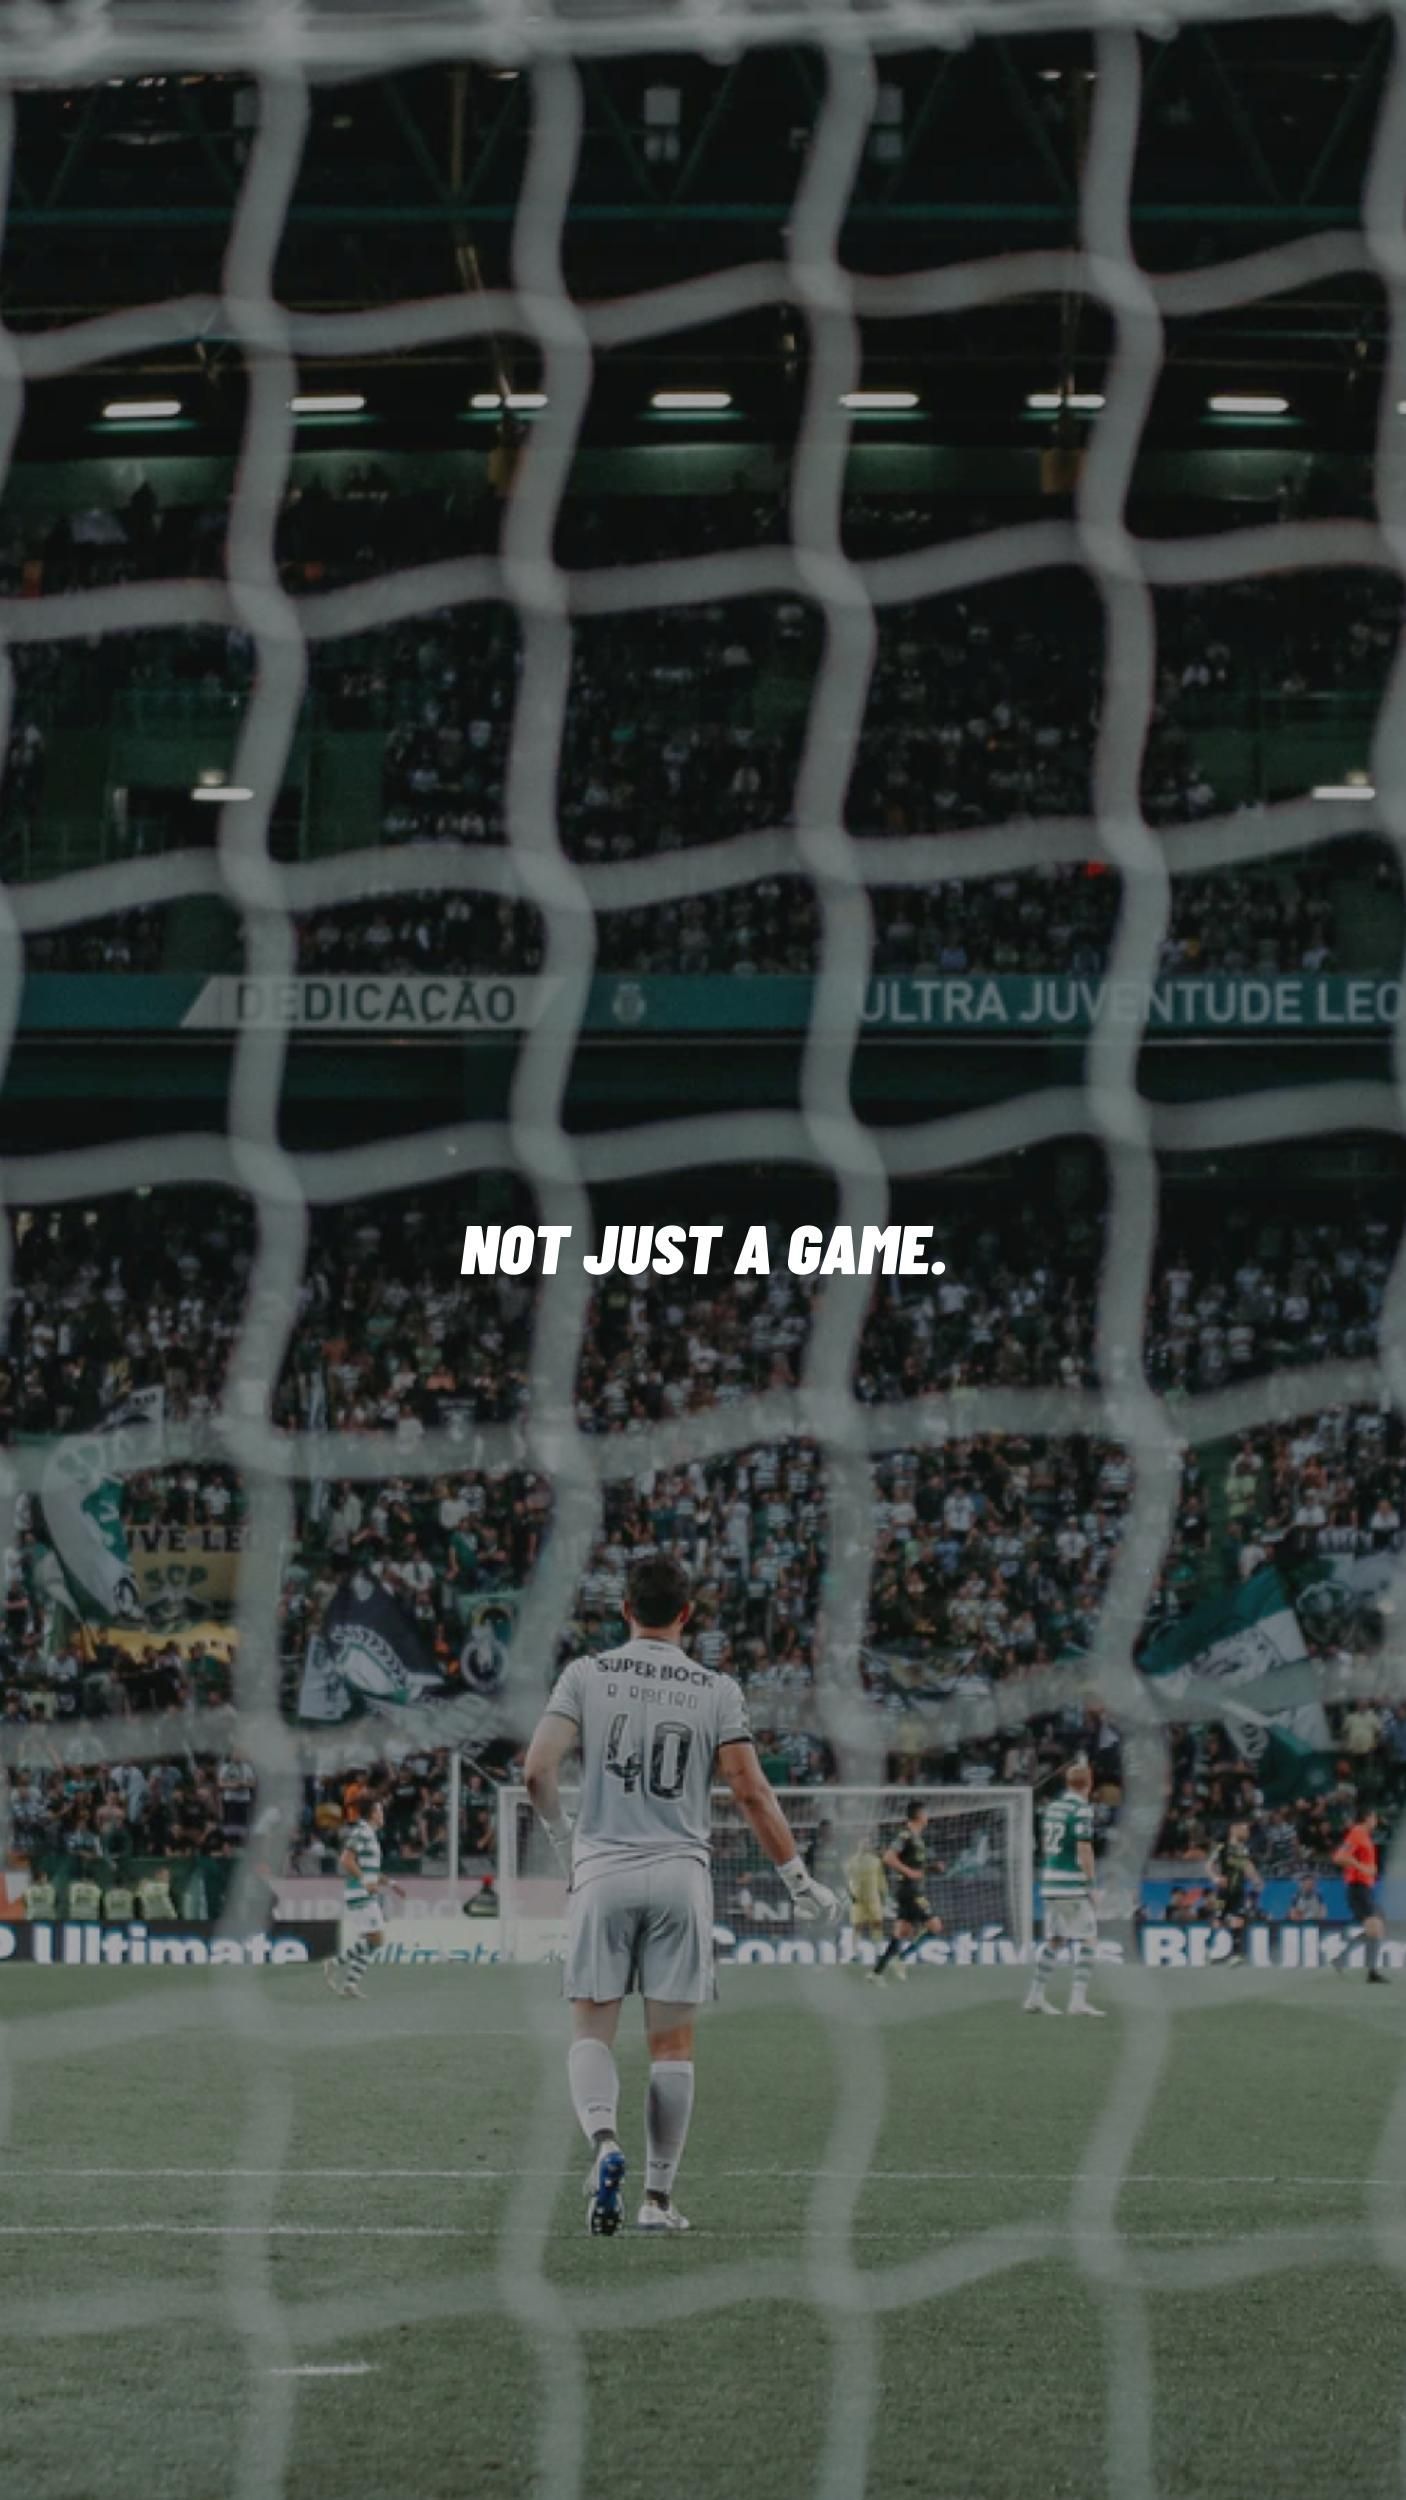 A soccer player standing in front of the goal with a phrase 